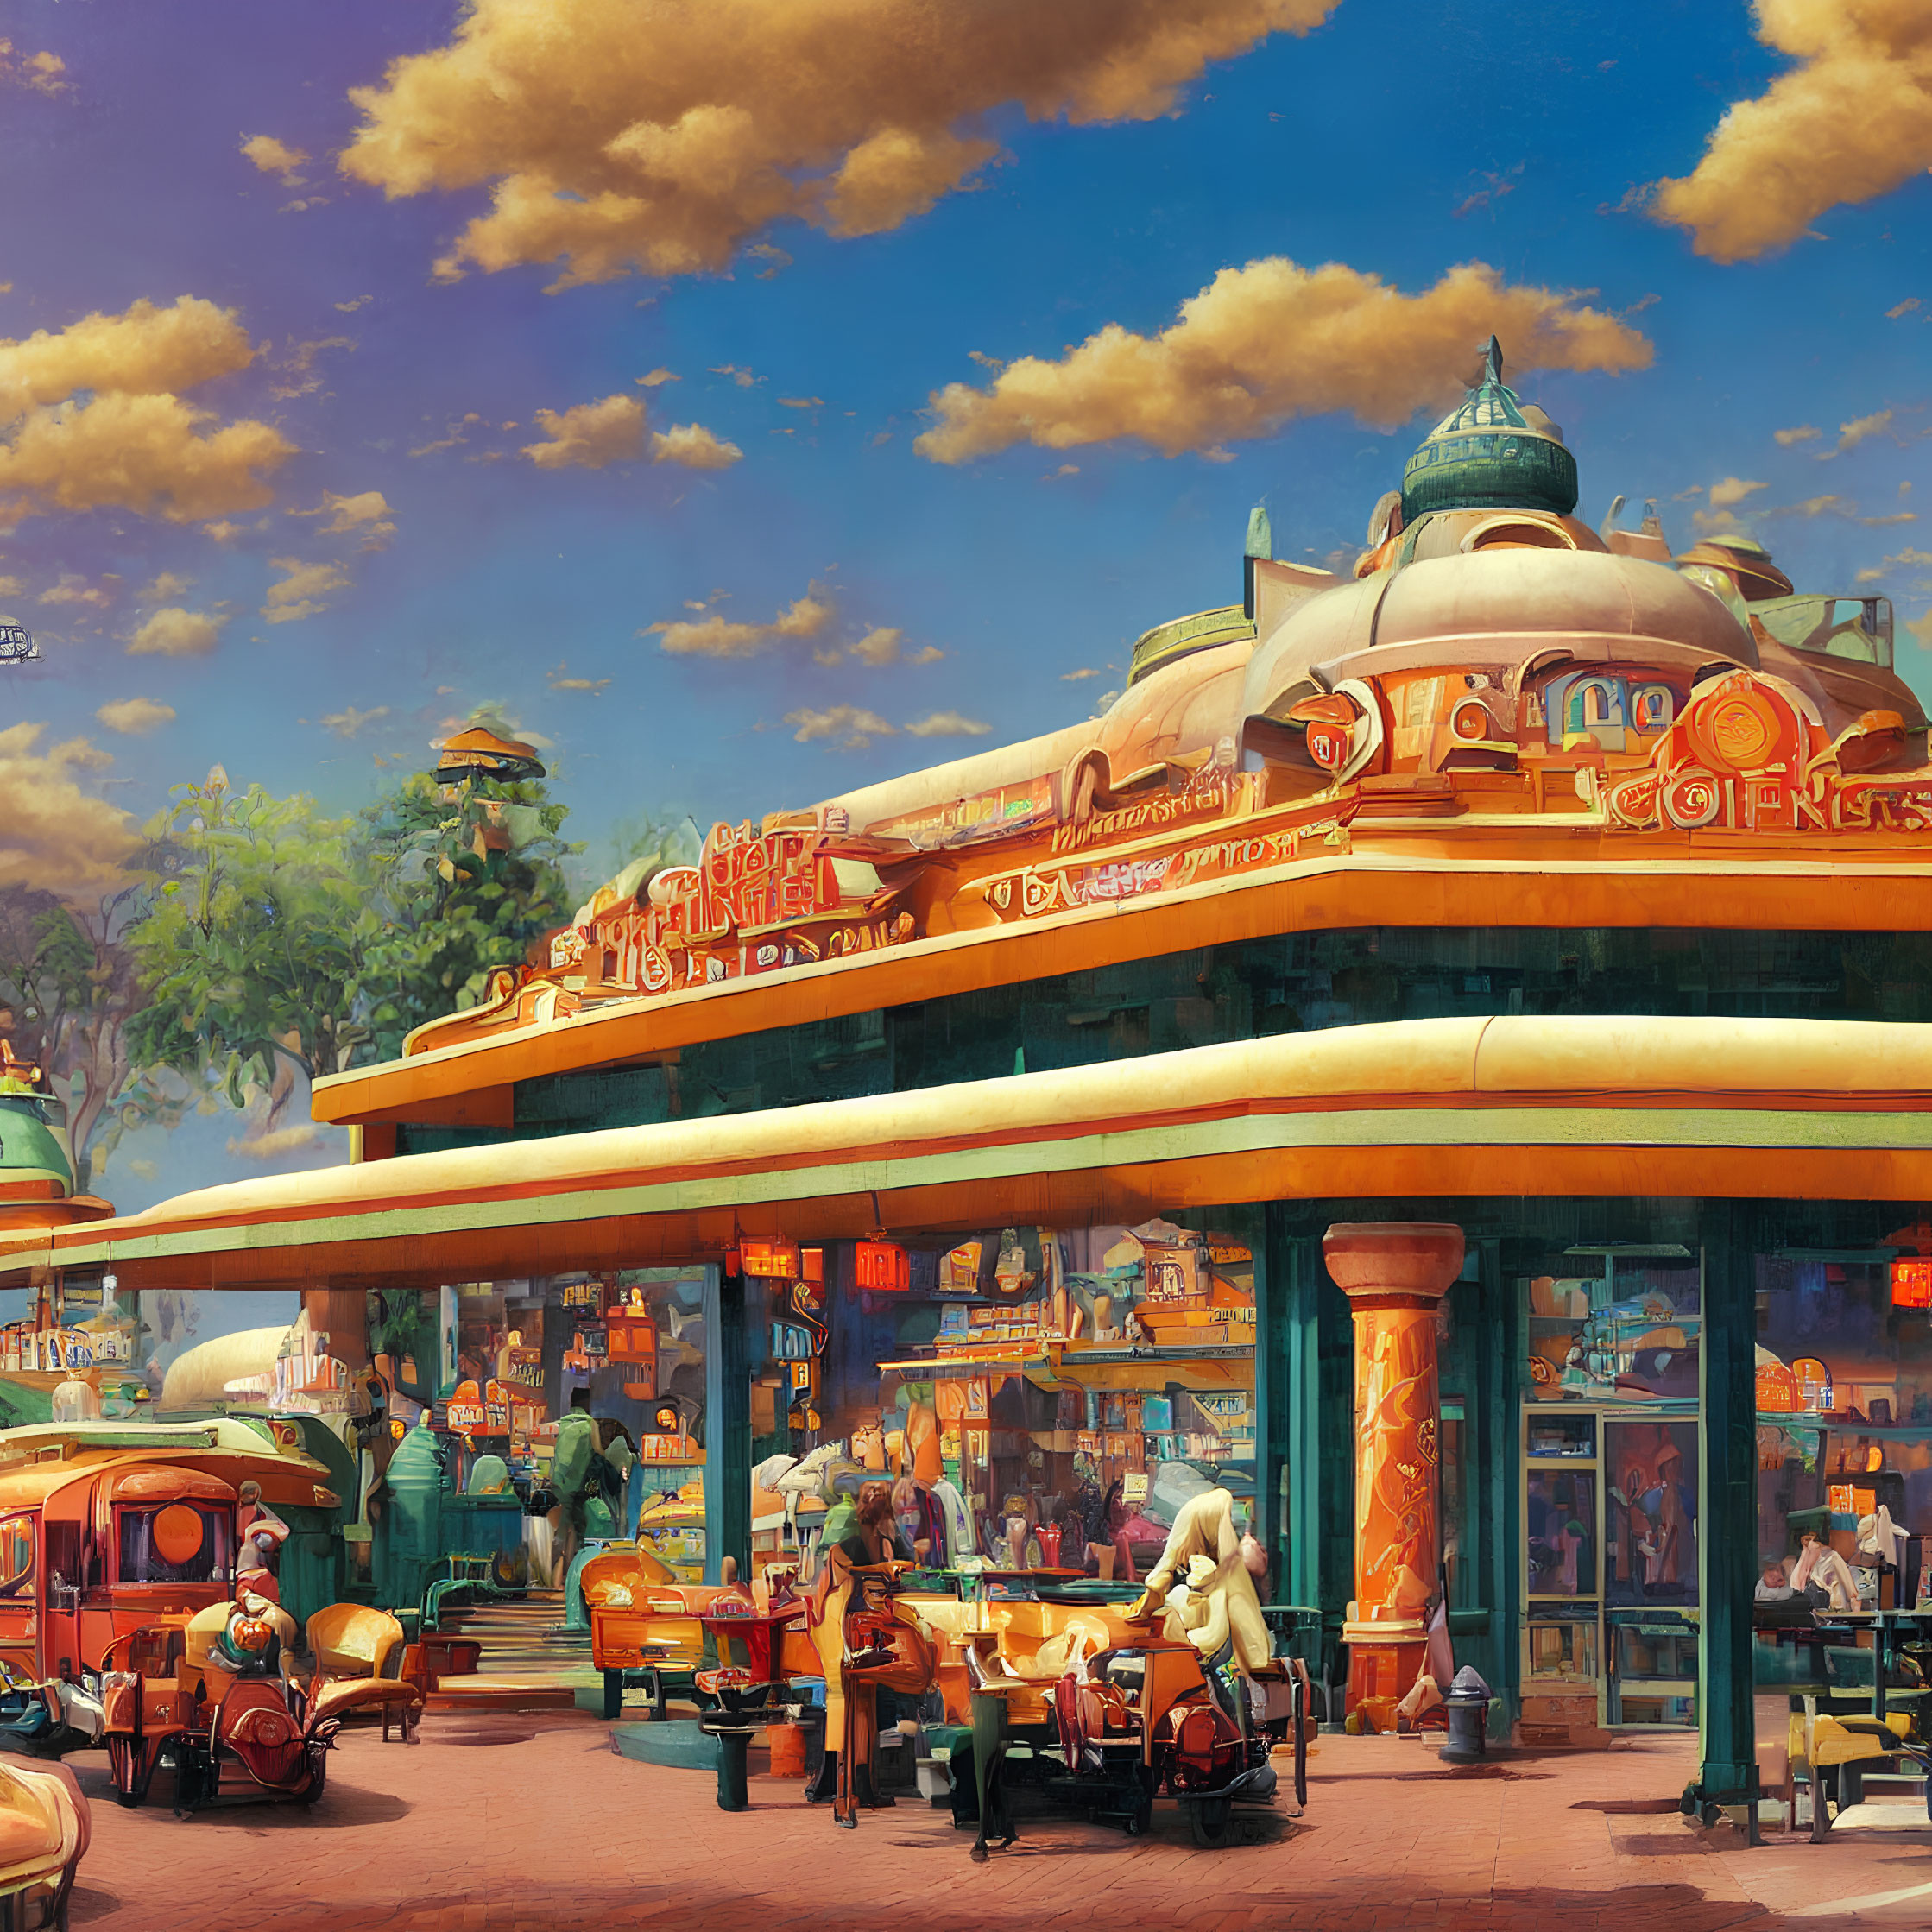 Vibrant retro-futuristic street scene with vintage vehicles and bustling crowd